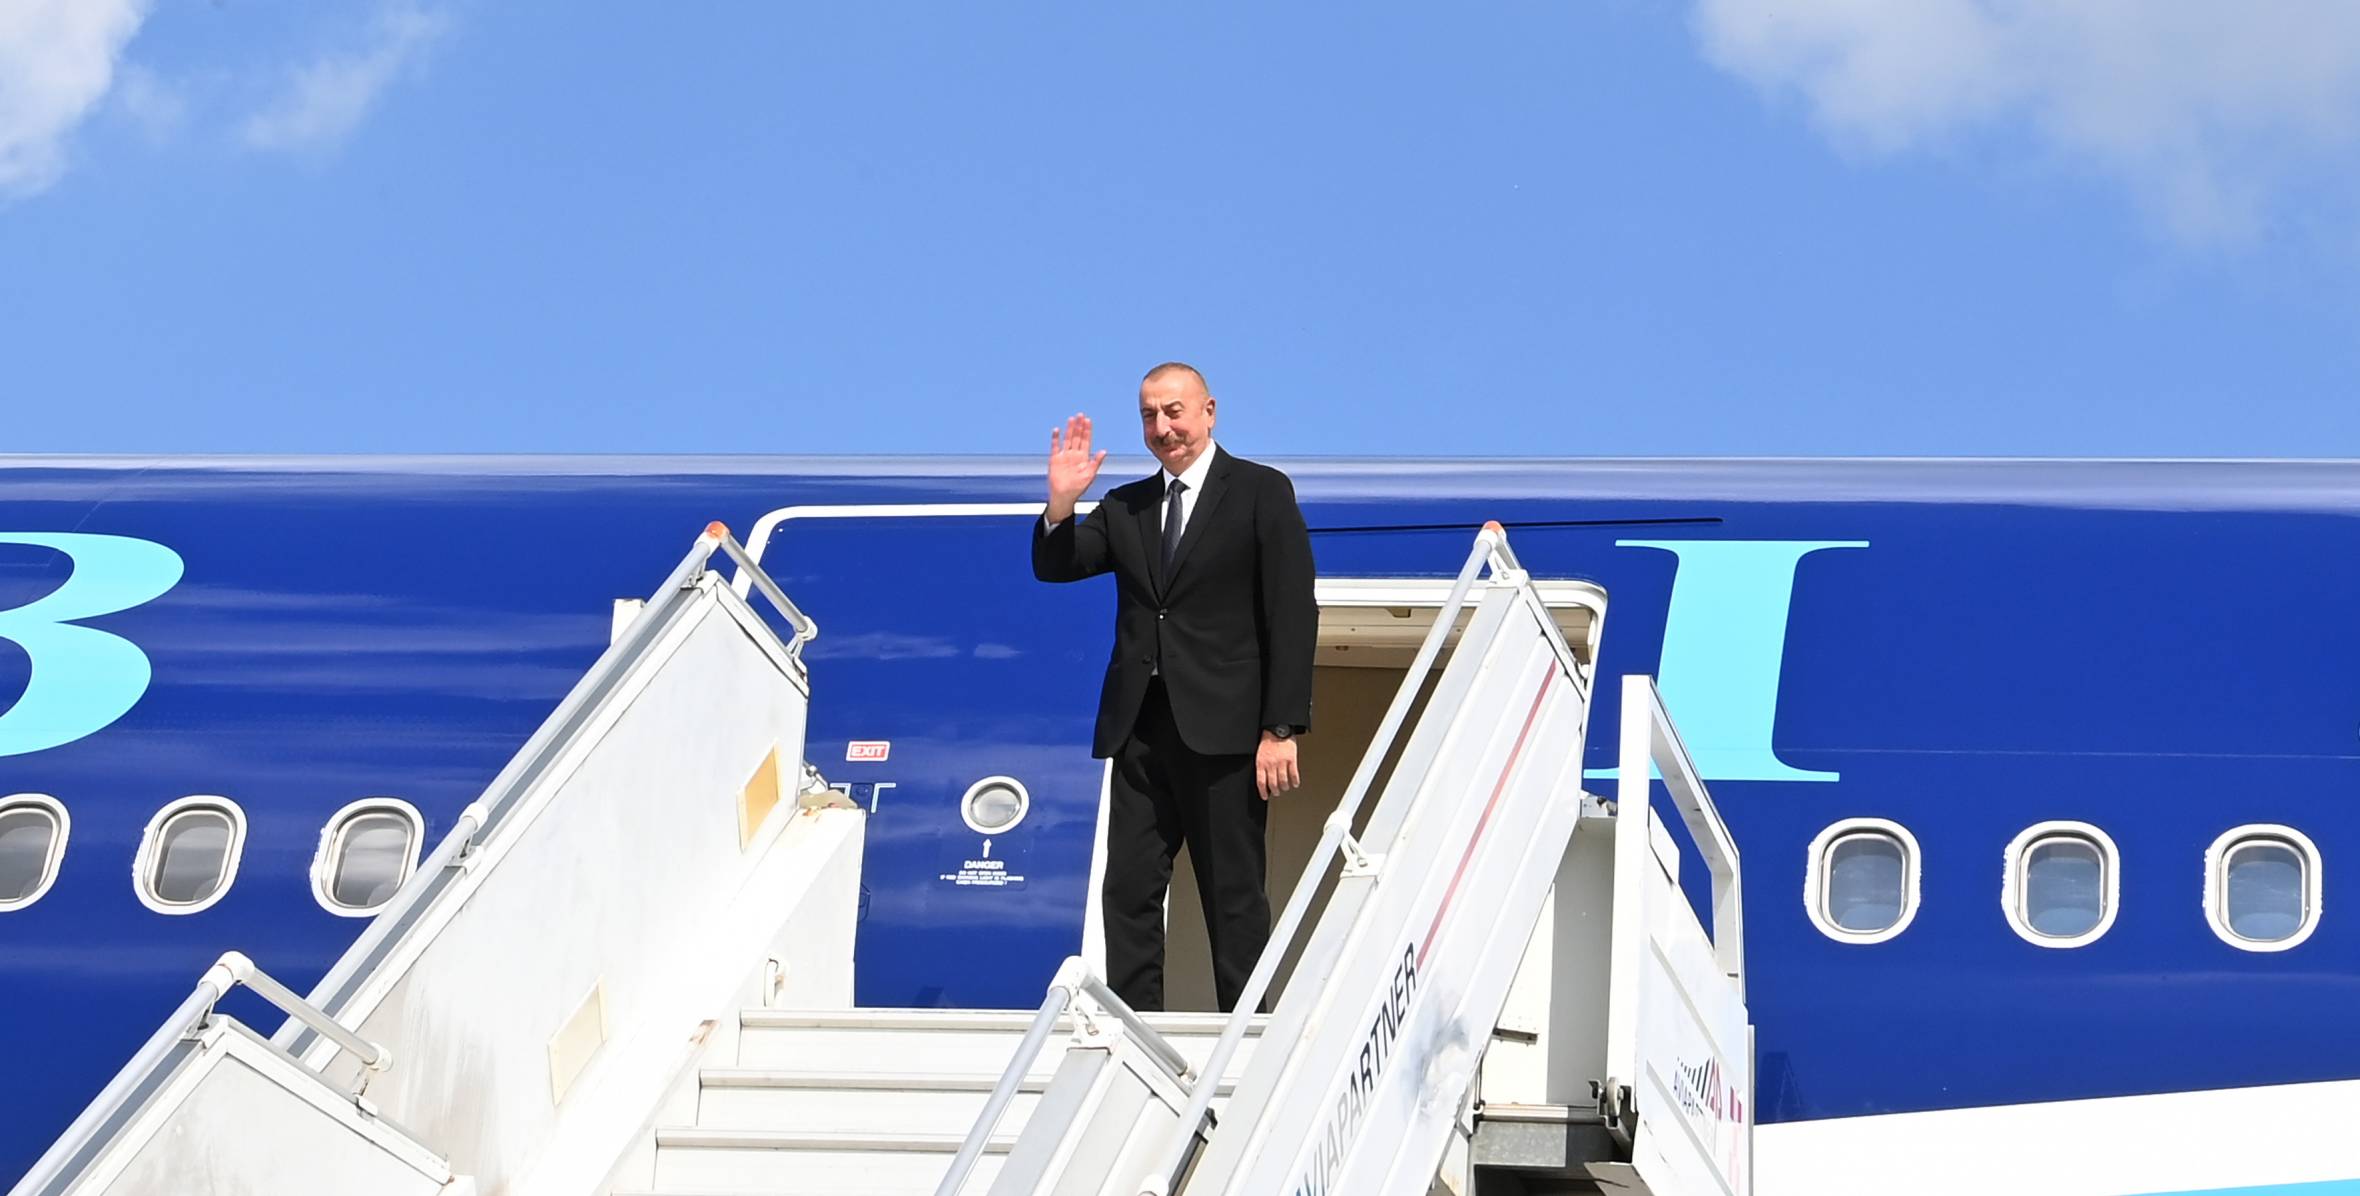 Ilham Aliyev completed his visit to Italy